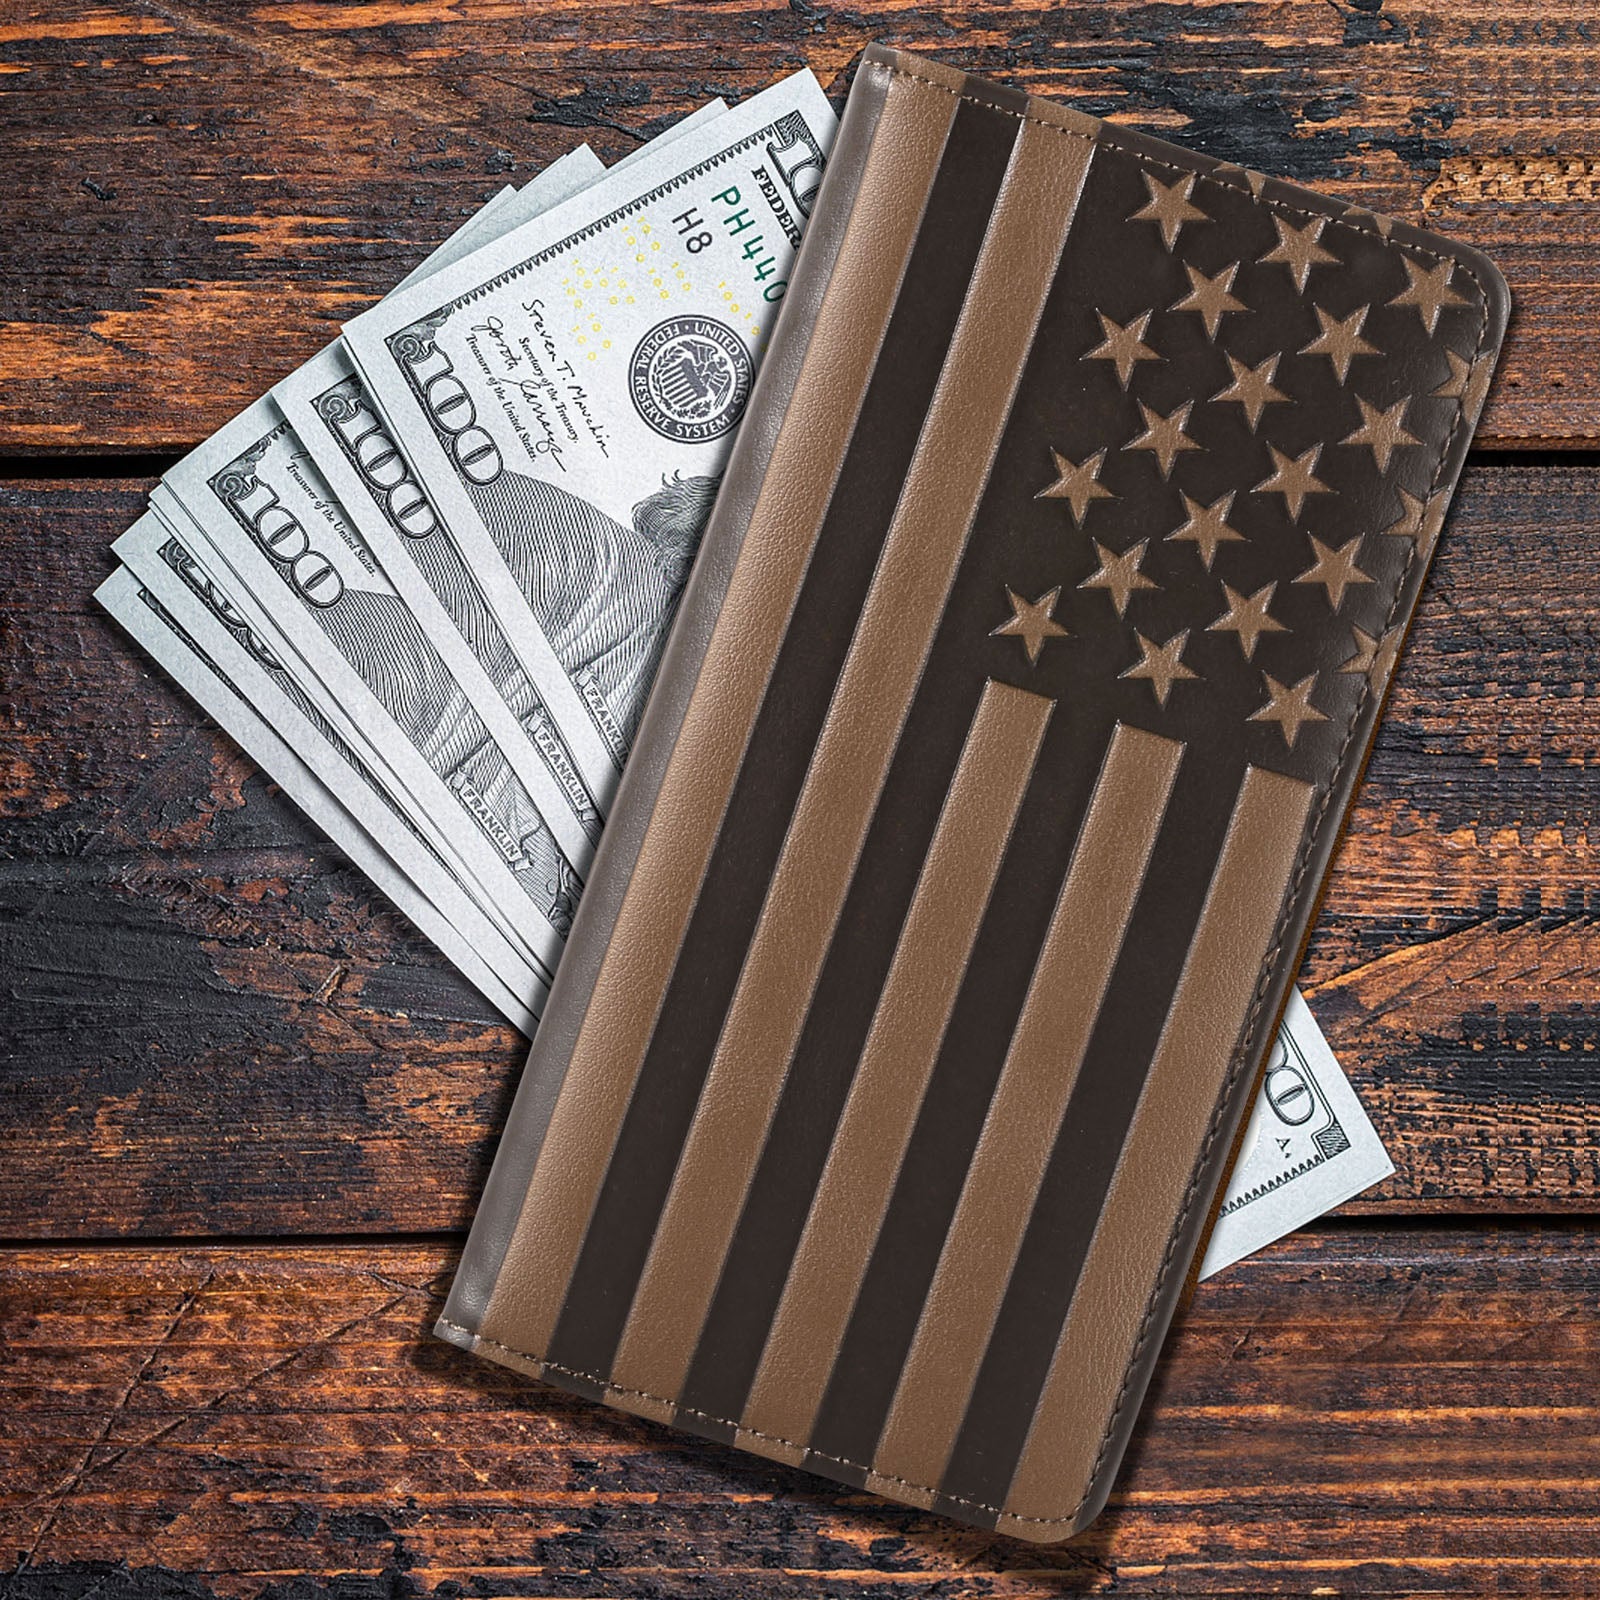 Patriotic Collection Men's Bifold Long PU Leather Wallet - Cowgirl Wear